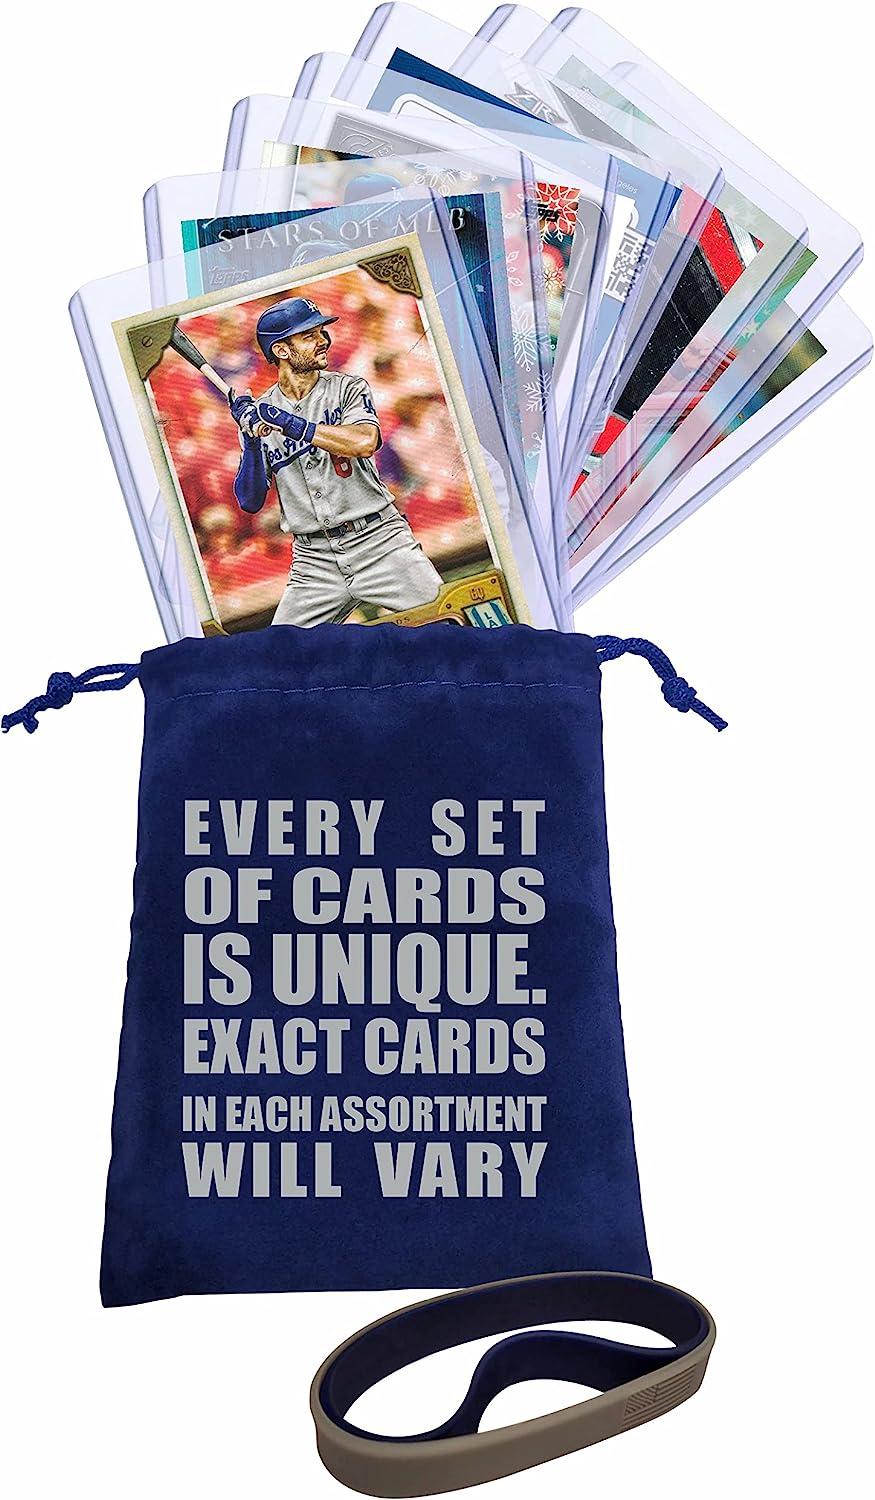 Cody Bellinger Baseball Cards (4) ASSORTED Los Angeles Dodgers Trading Card  and Wristbands Gift Bundle